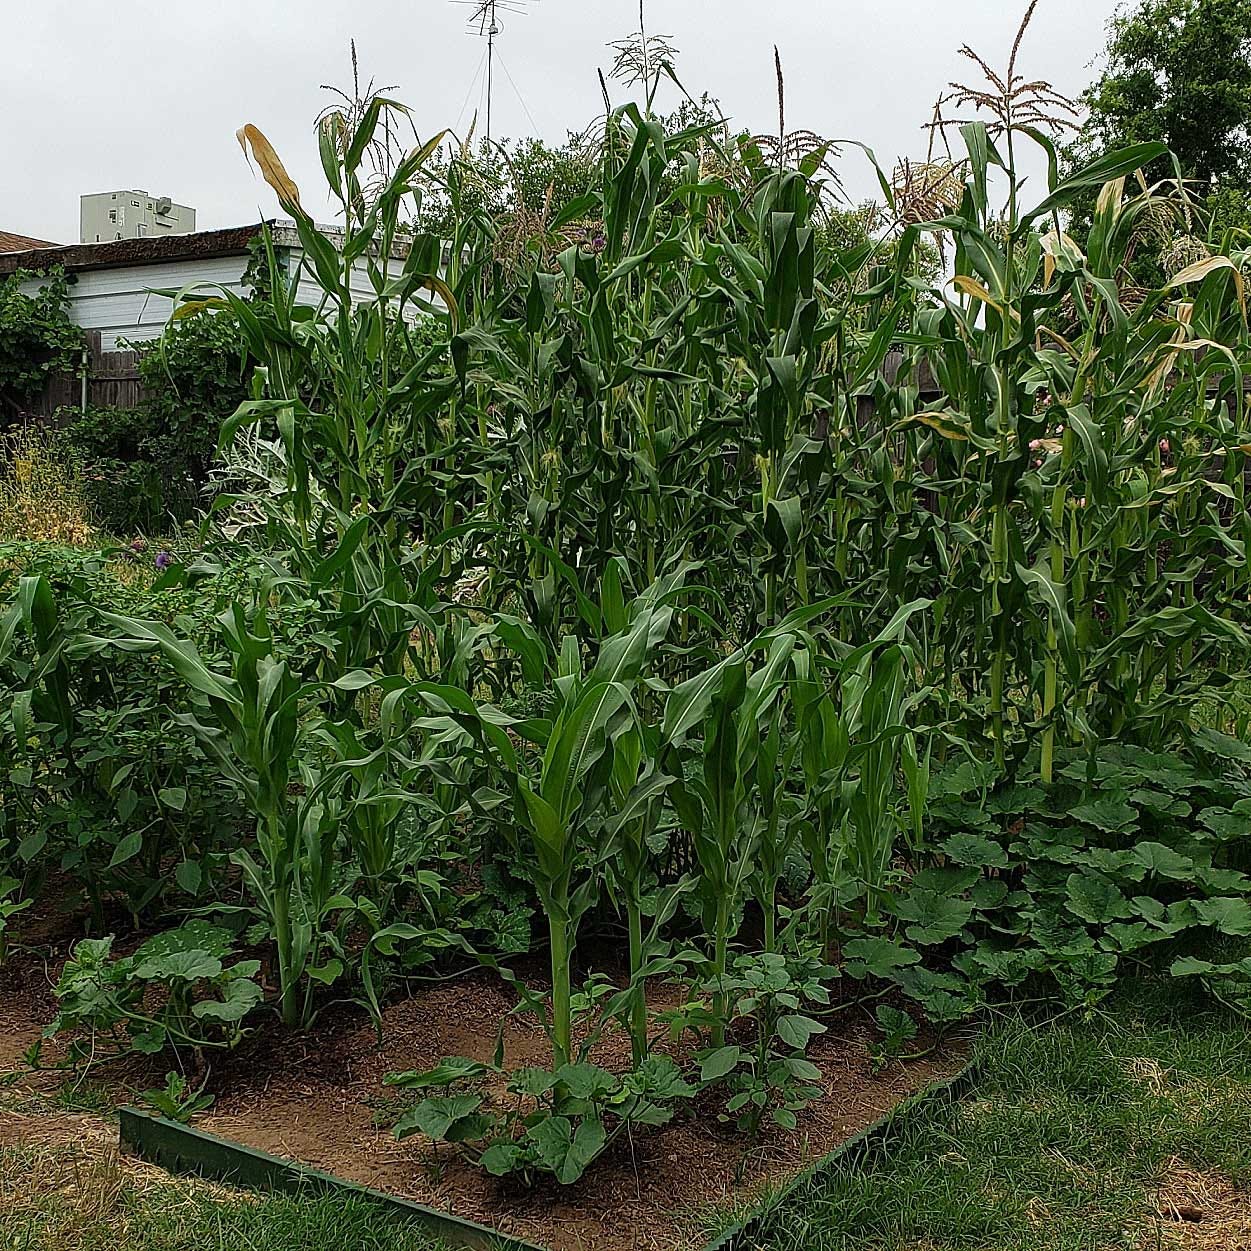 Our riot of a garden, with corn, beans, and squash. 